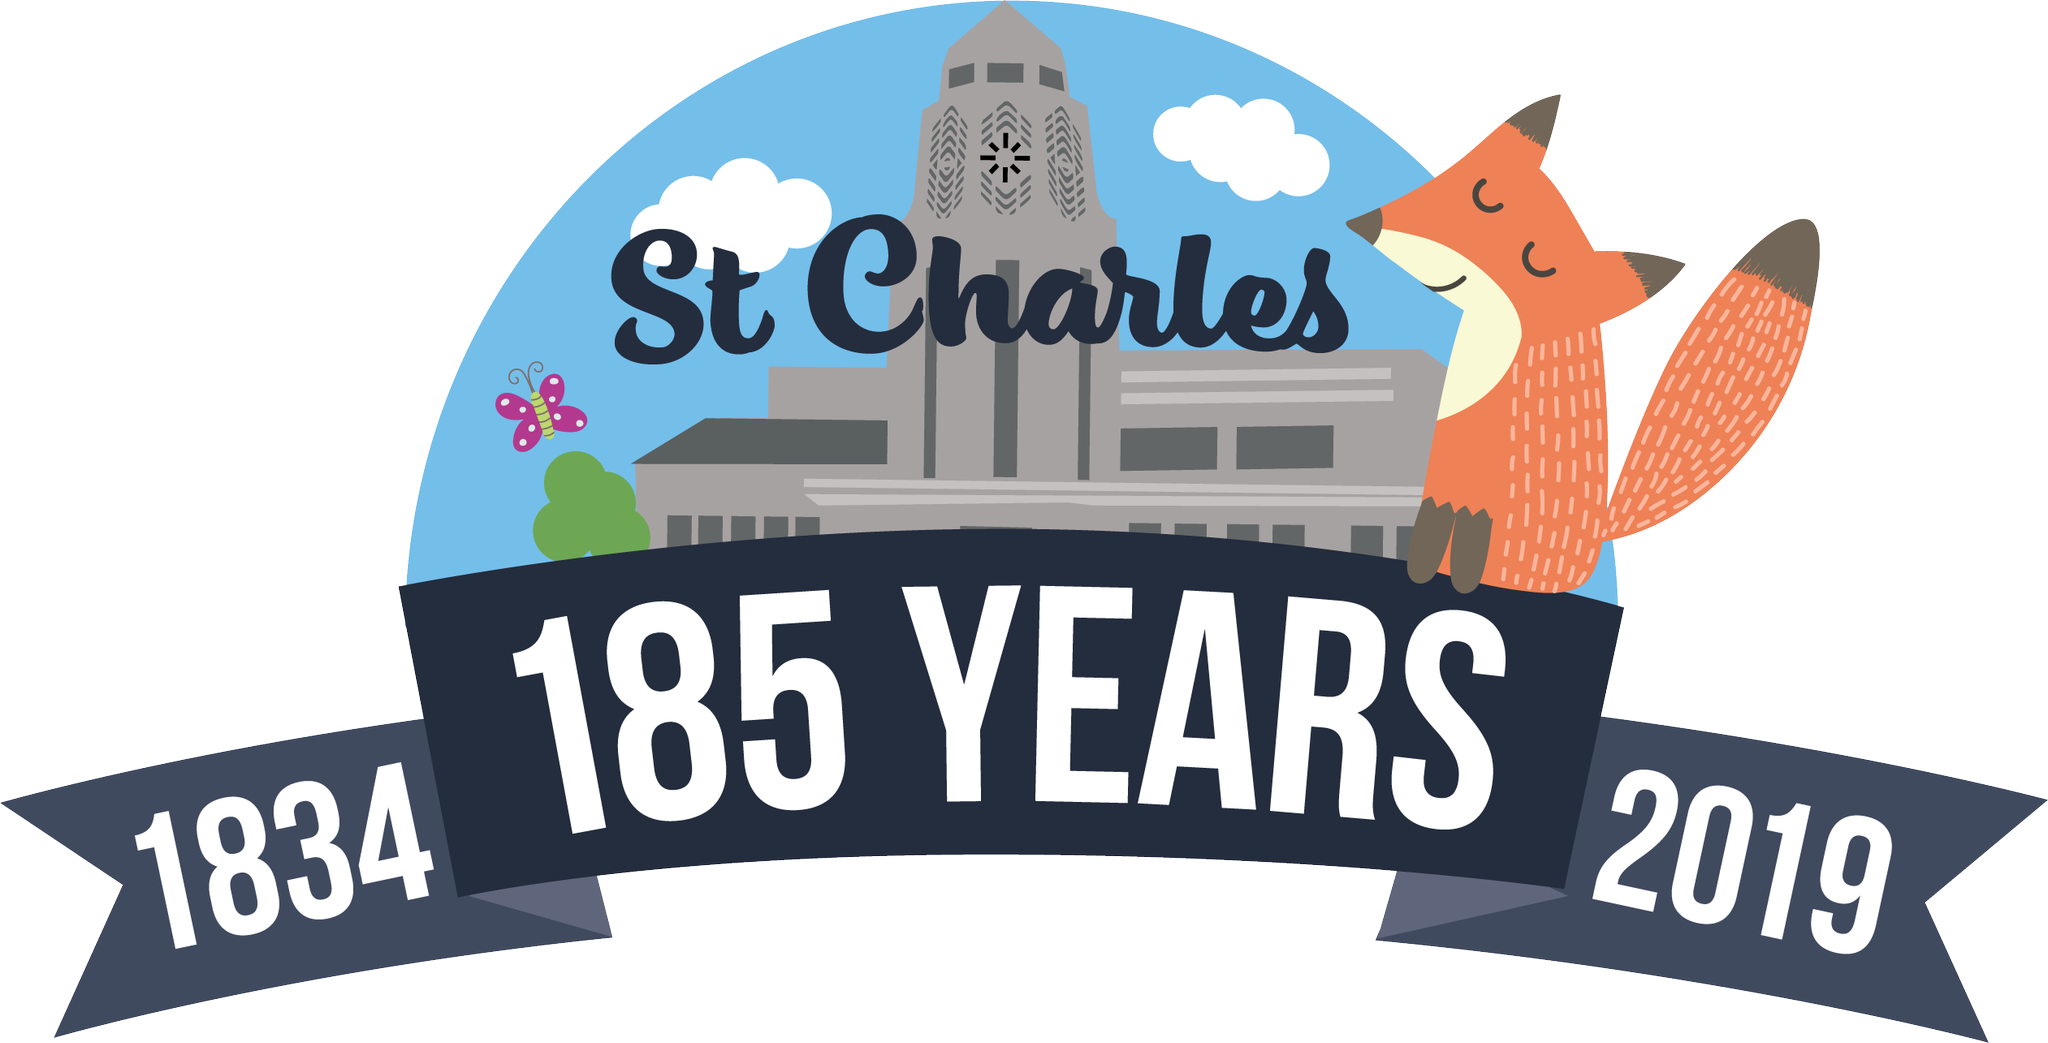 City of St. Charles, IL on Twitter "2019 marks the StCharlesIL 185th